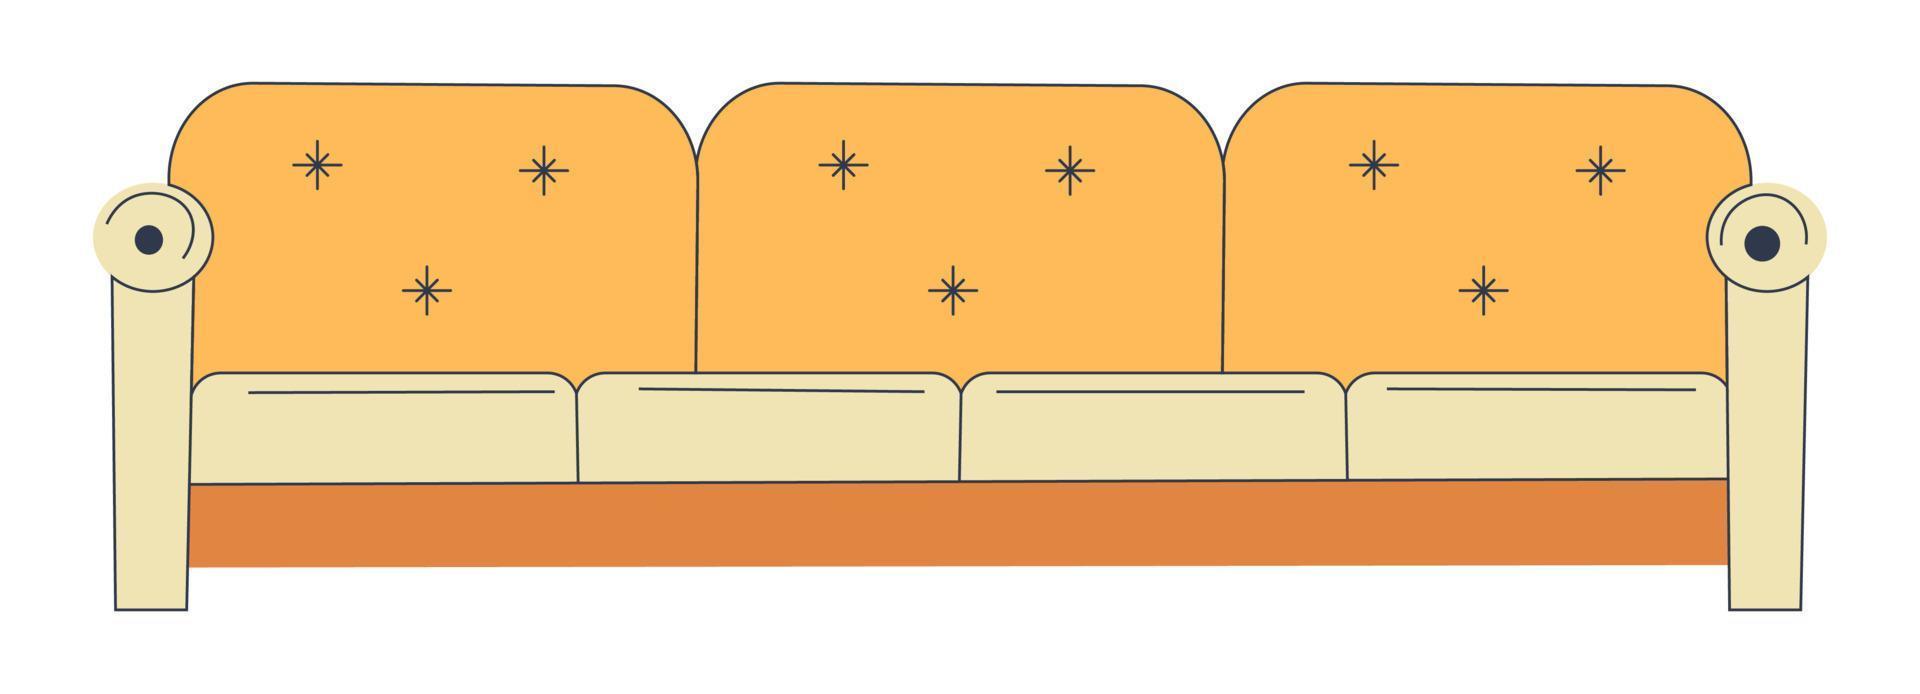 Sofa with comfy cushions, furniture for home interior vector